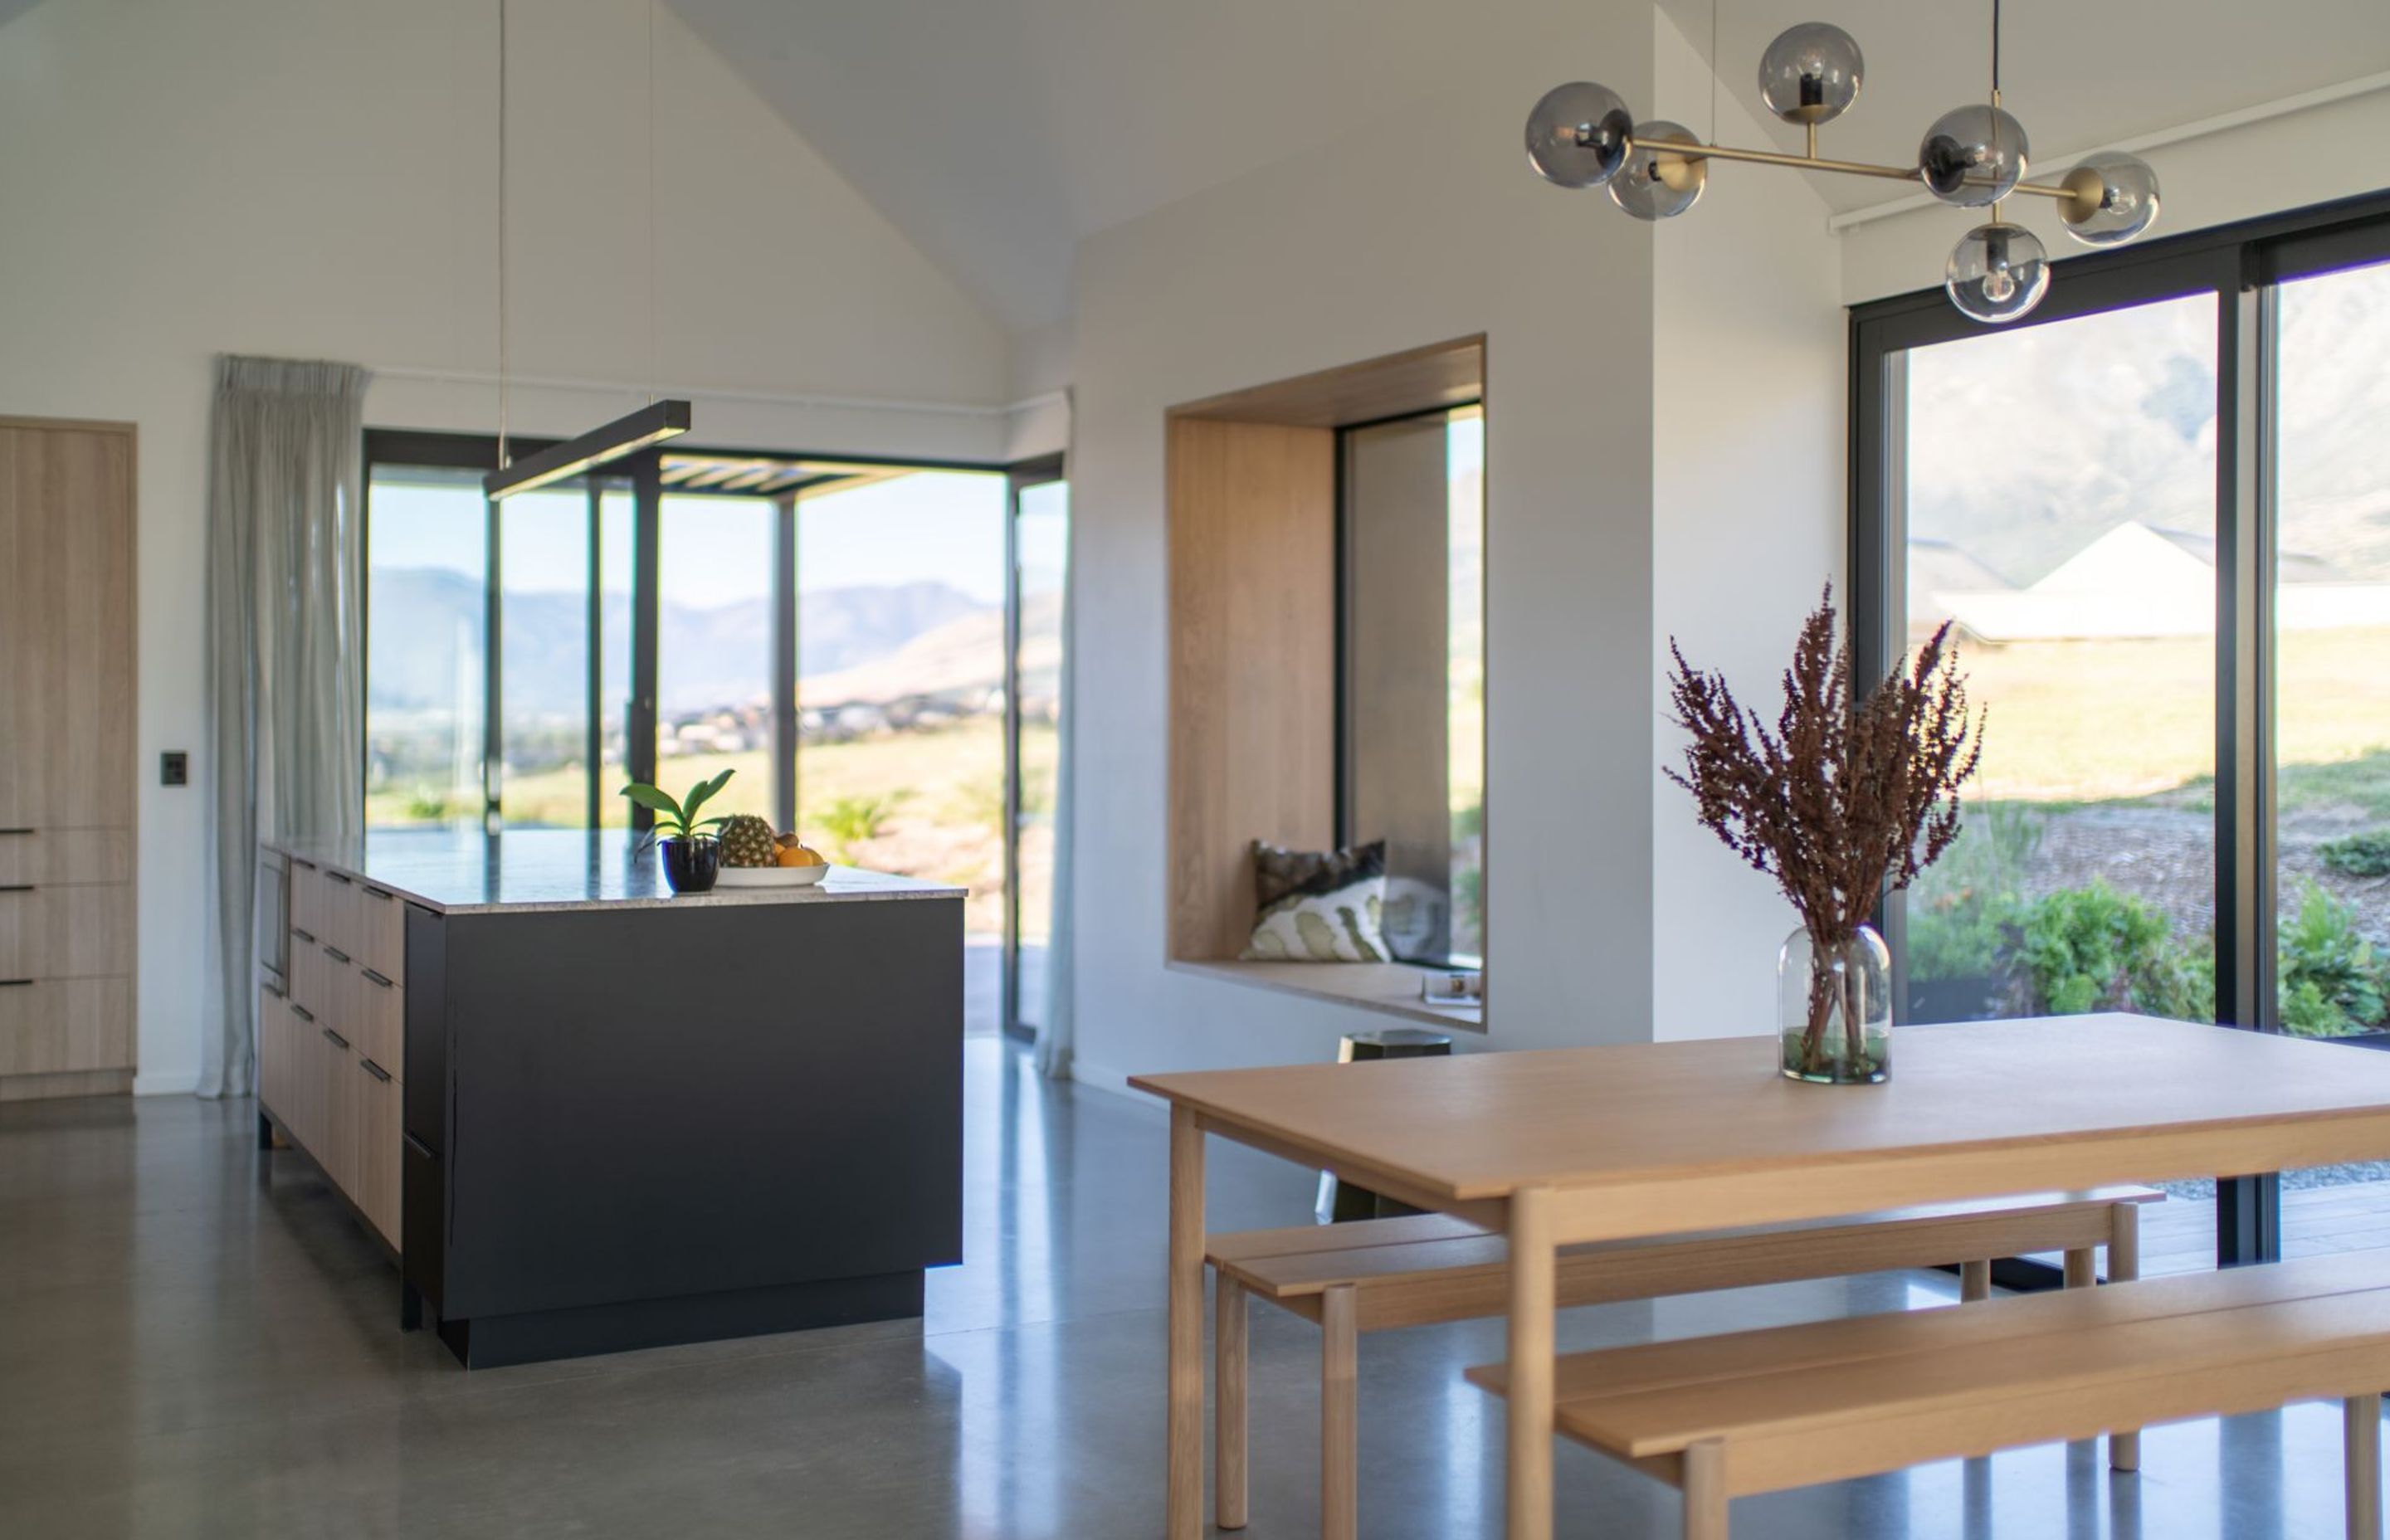 The open-plan kitchen/dining space takes in a huge amount of natural light through extensive glazing.